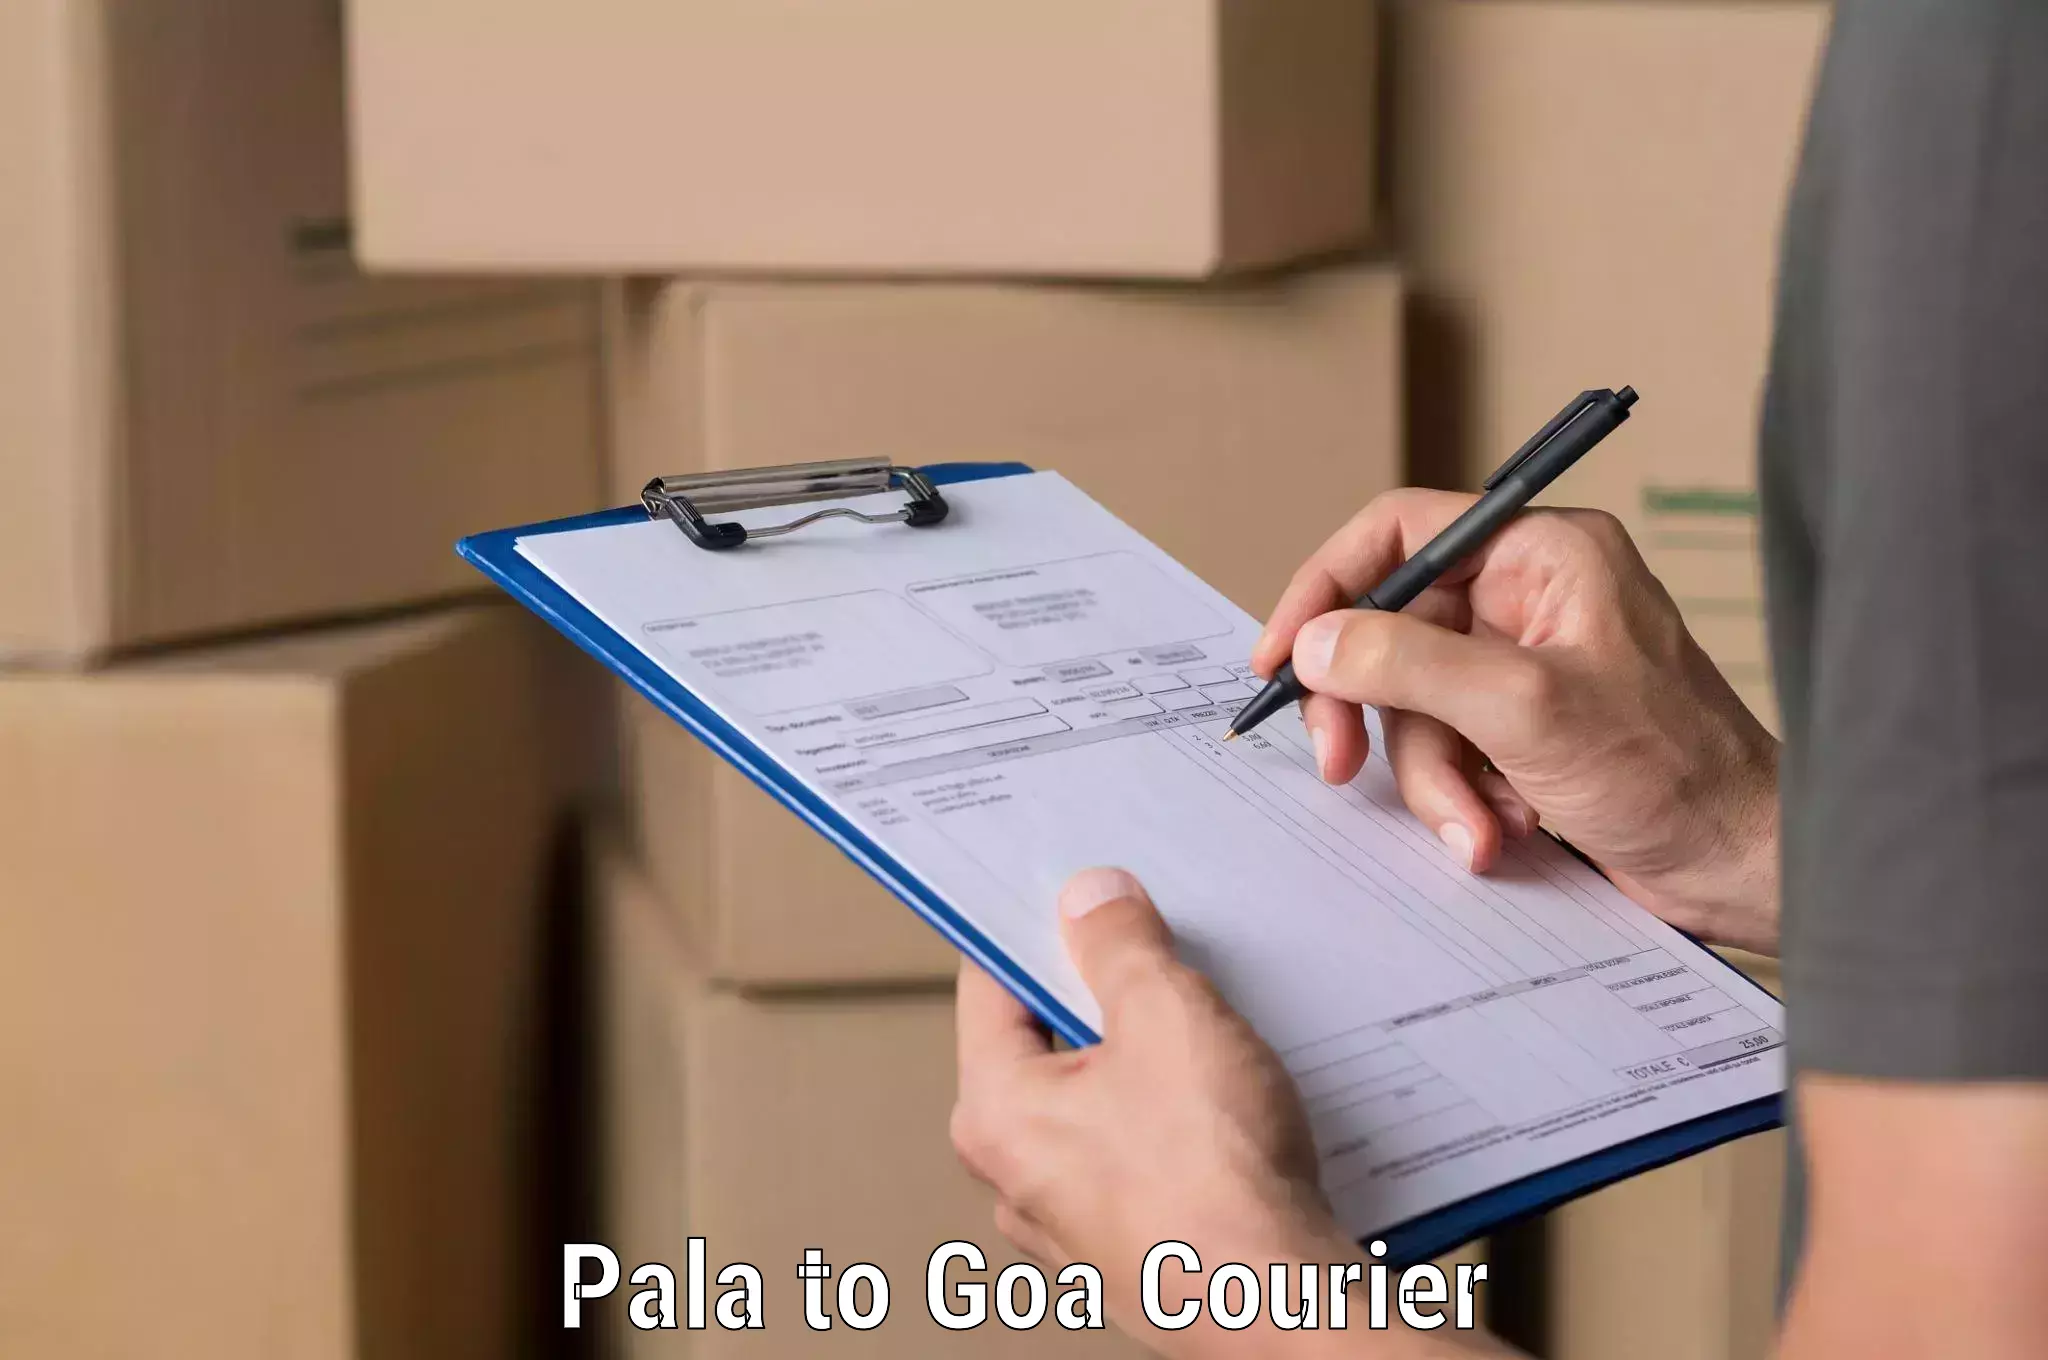 High-priority parcel service Pala to Goa